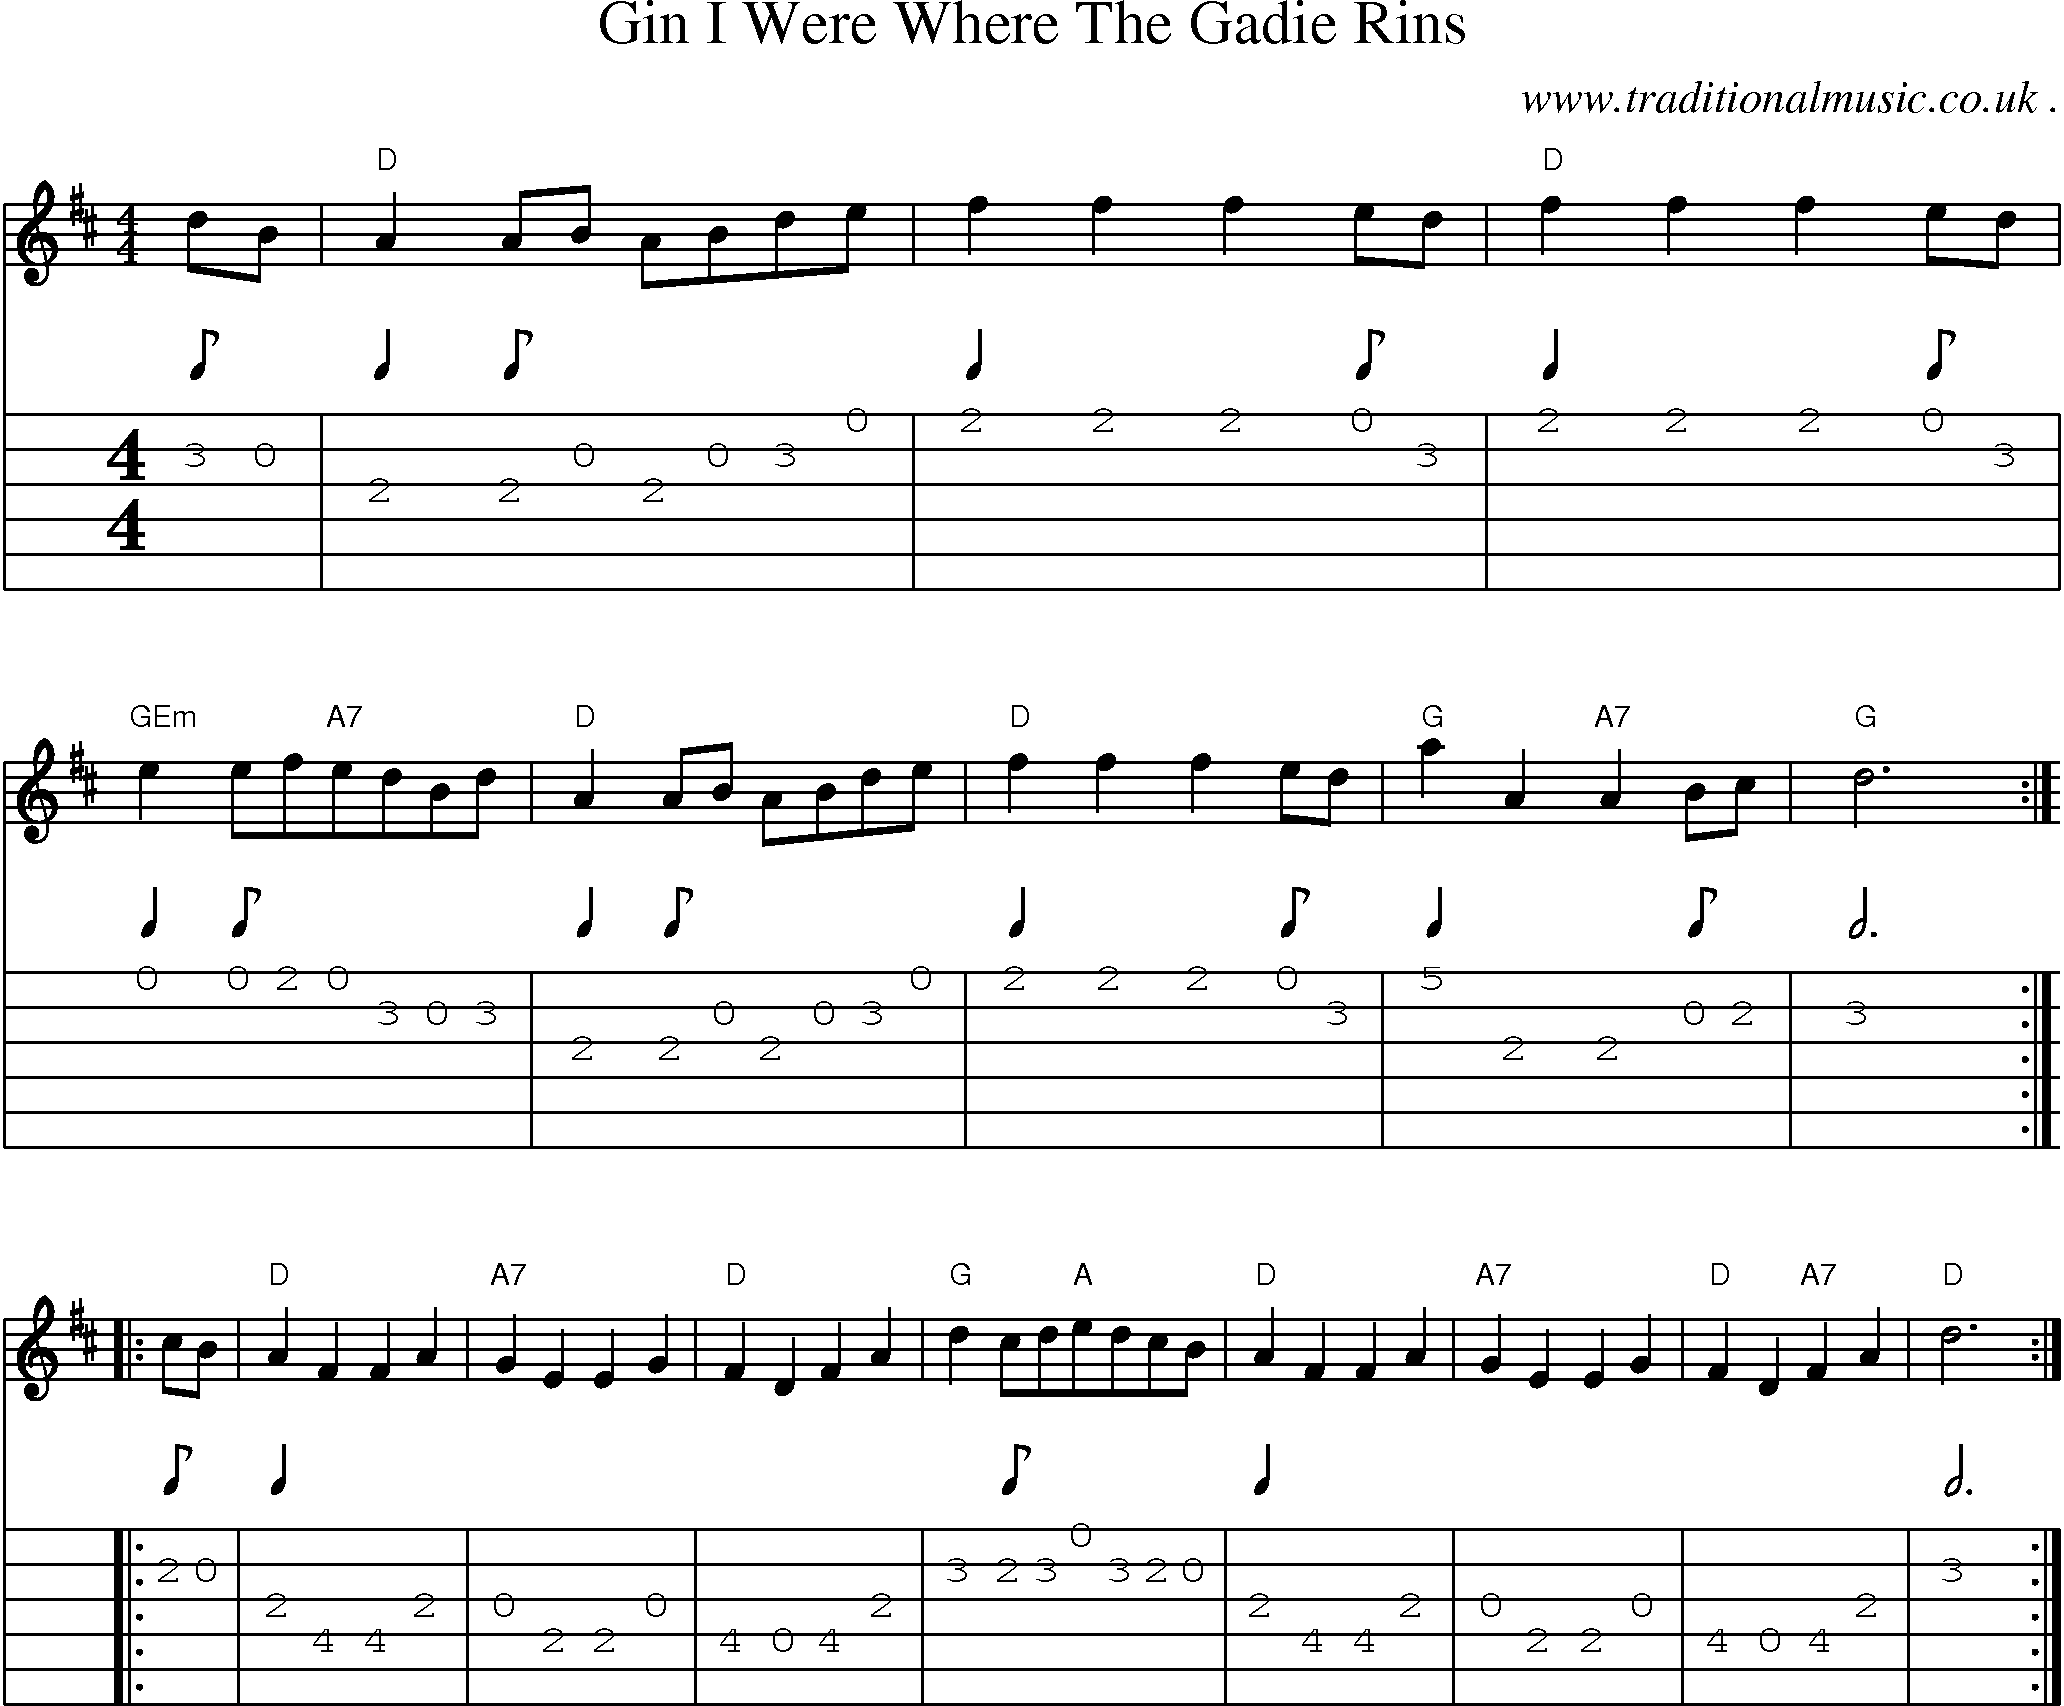 Sheet-Music and Guitar Tabs for Gin I Were Where The Gadie Rins